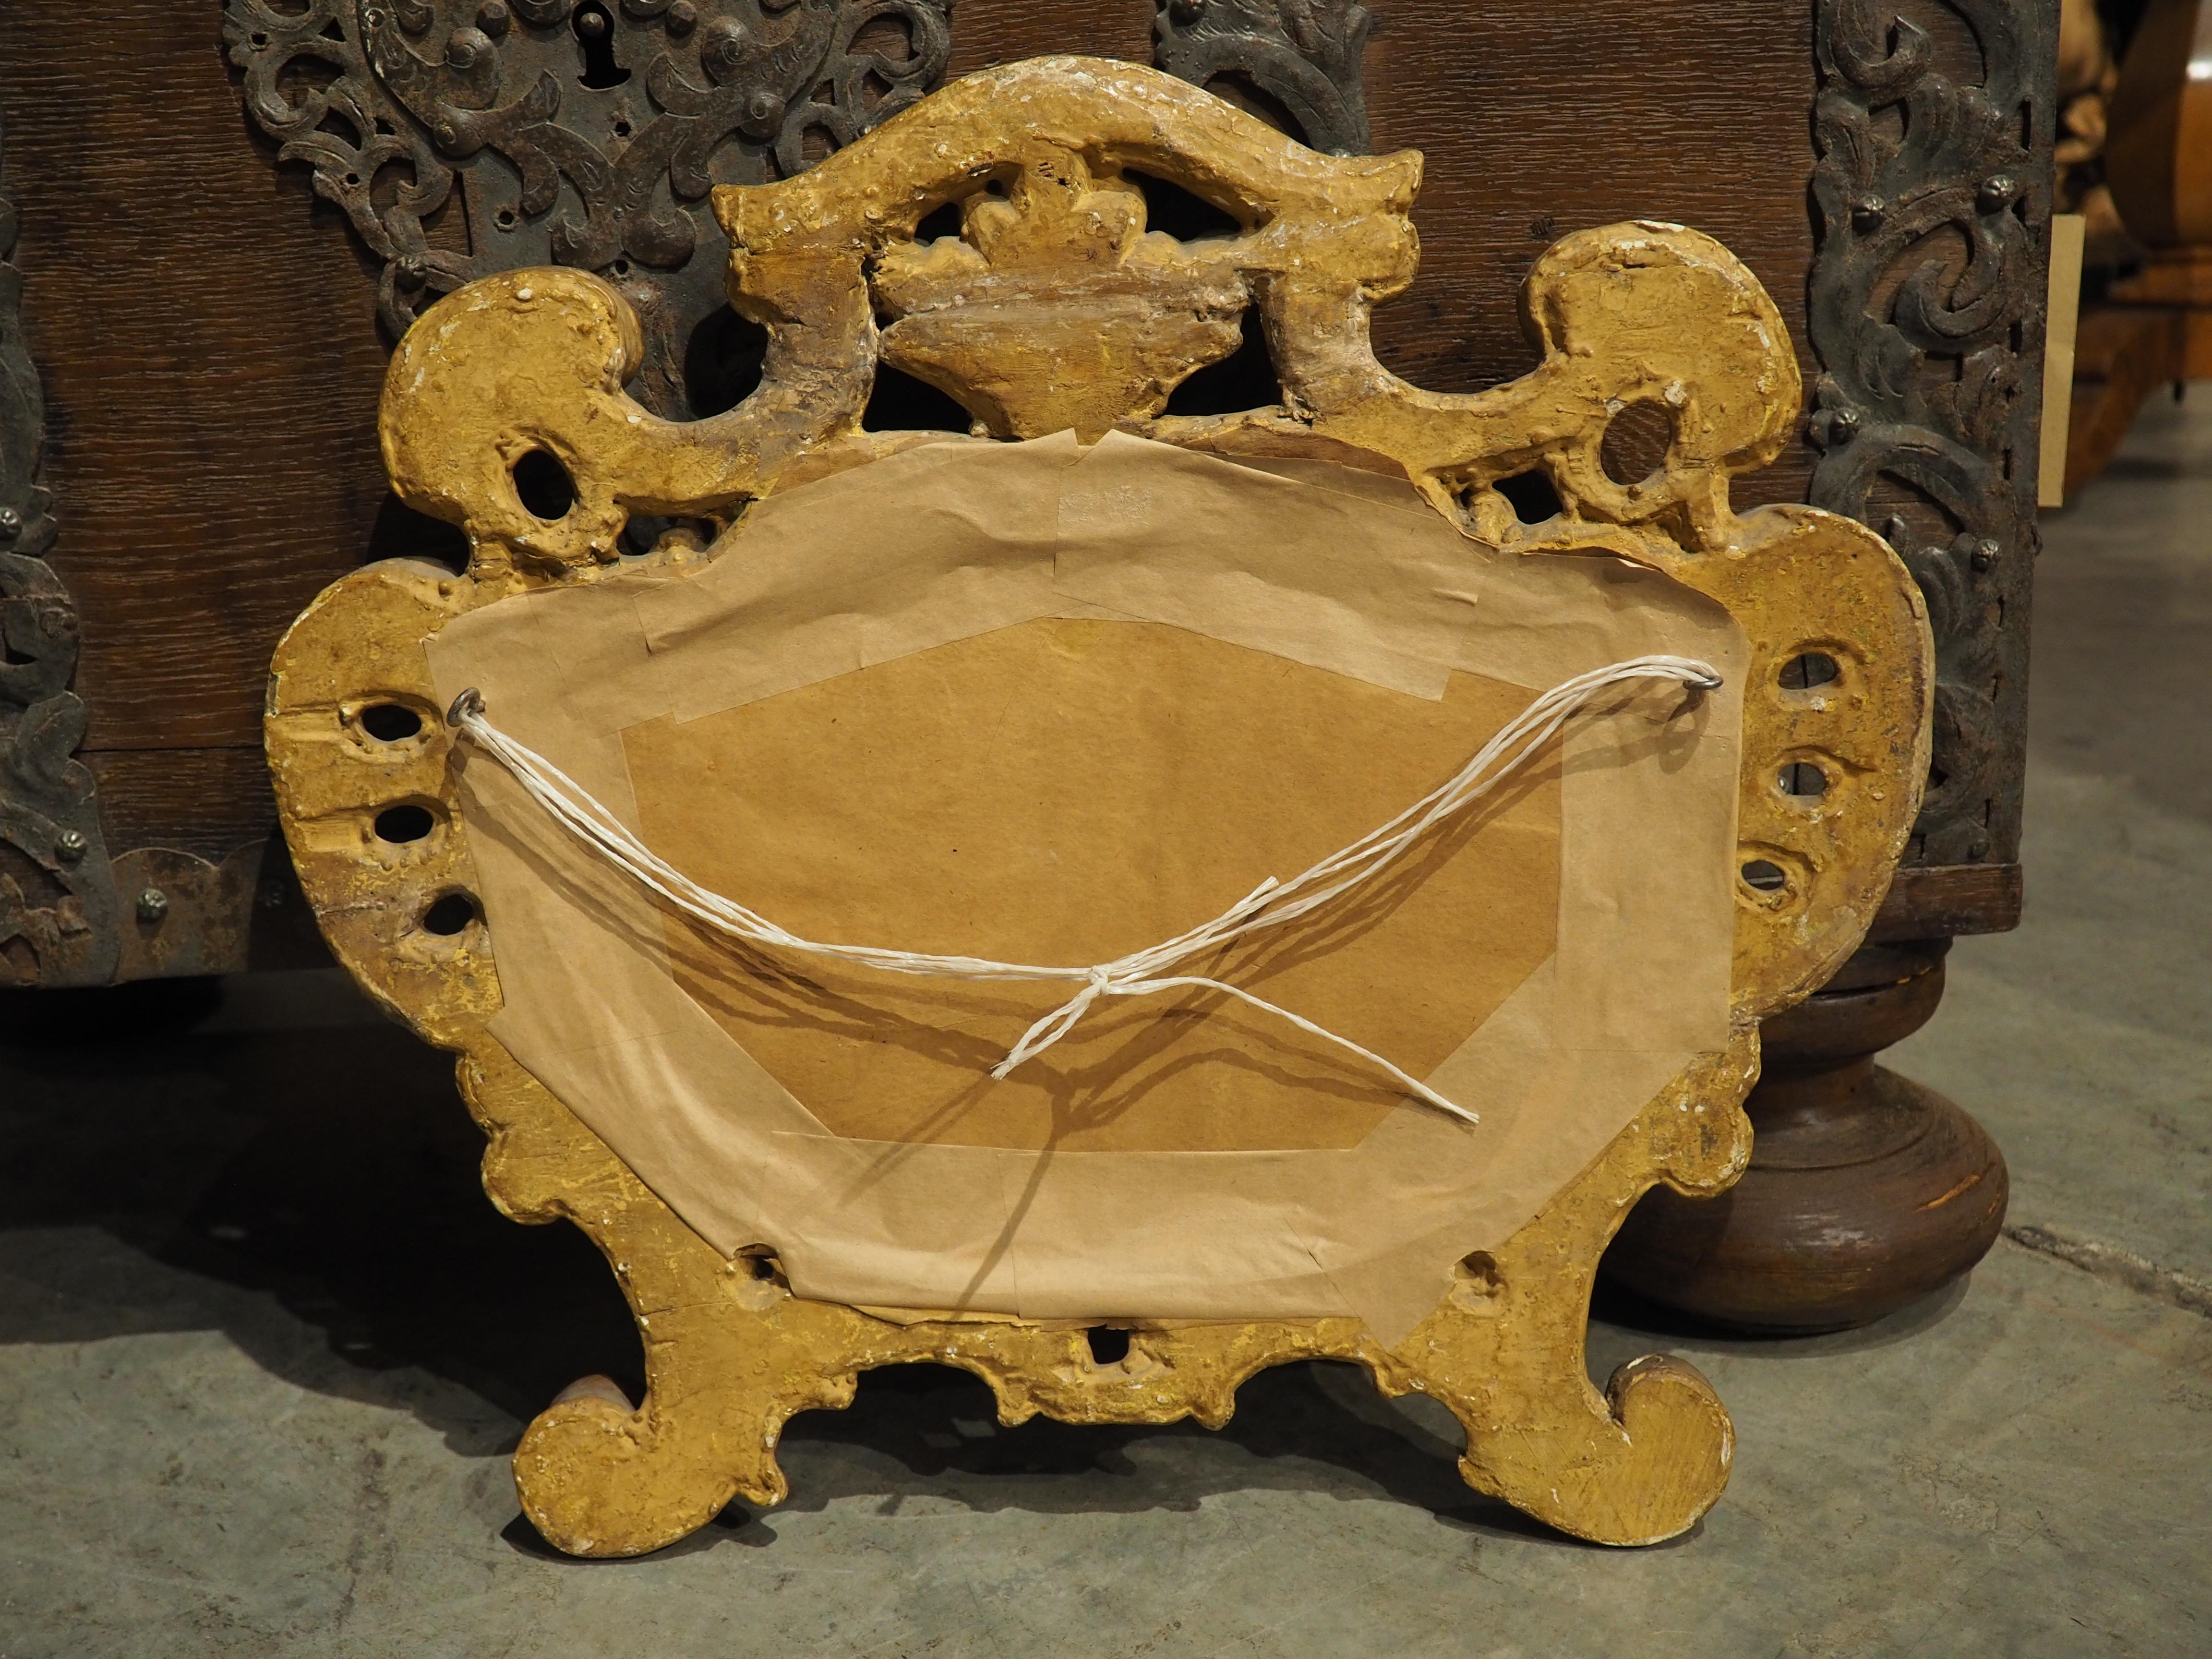 Hand-carved circa 1750 in Italy, this Baroque giltwood cartouche mirror features a shaped piece of glass surrounded by a lovely golden cartouche with pierced elements. Inspired by nature, the carvings include attenuated leaves, volutes, scrolls, and